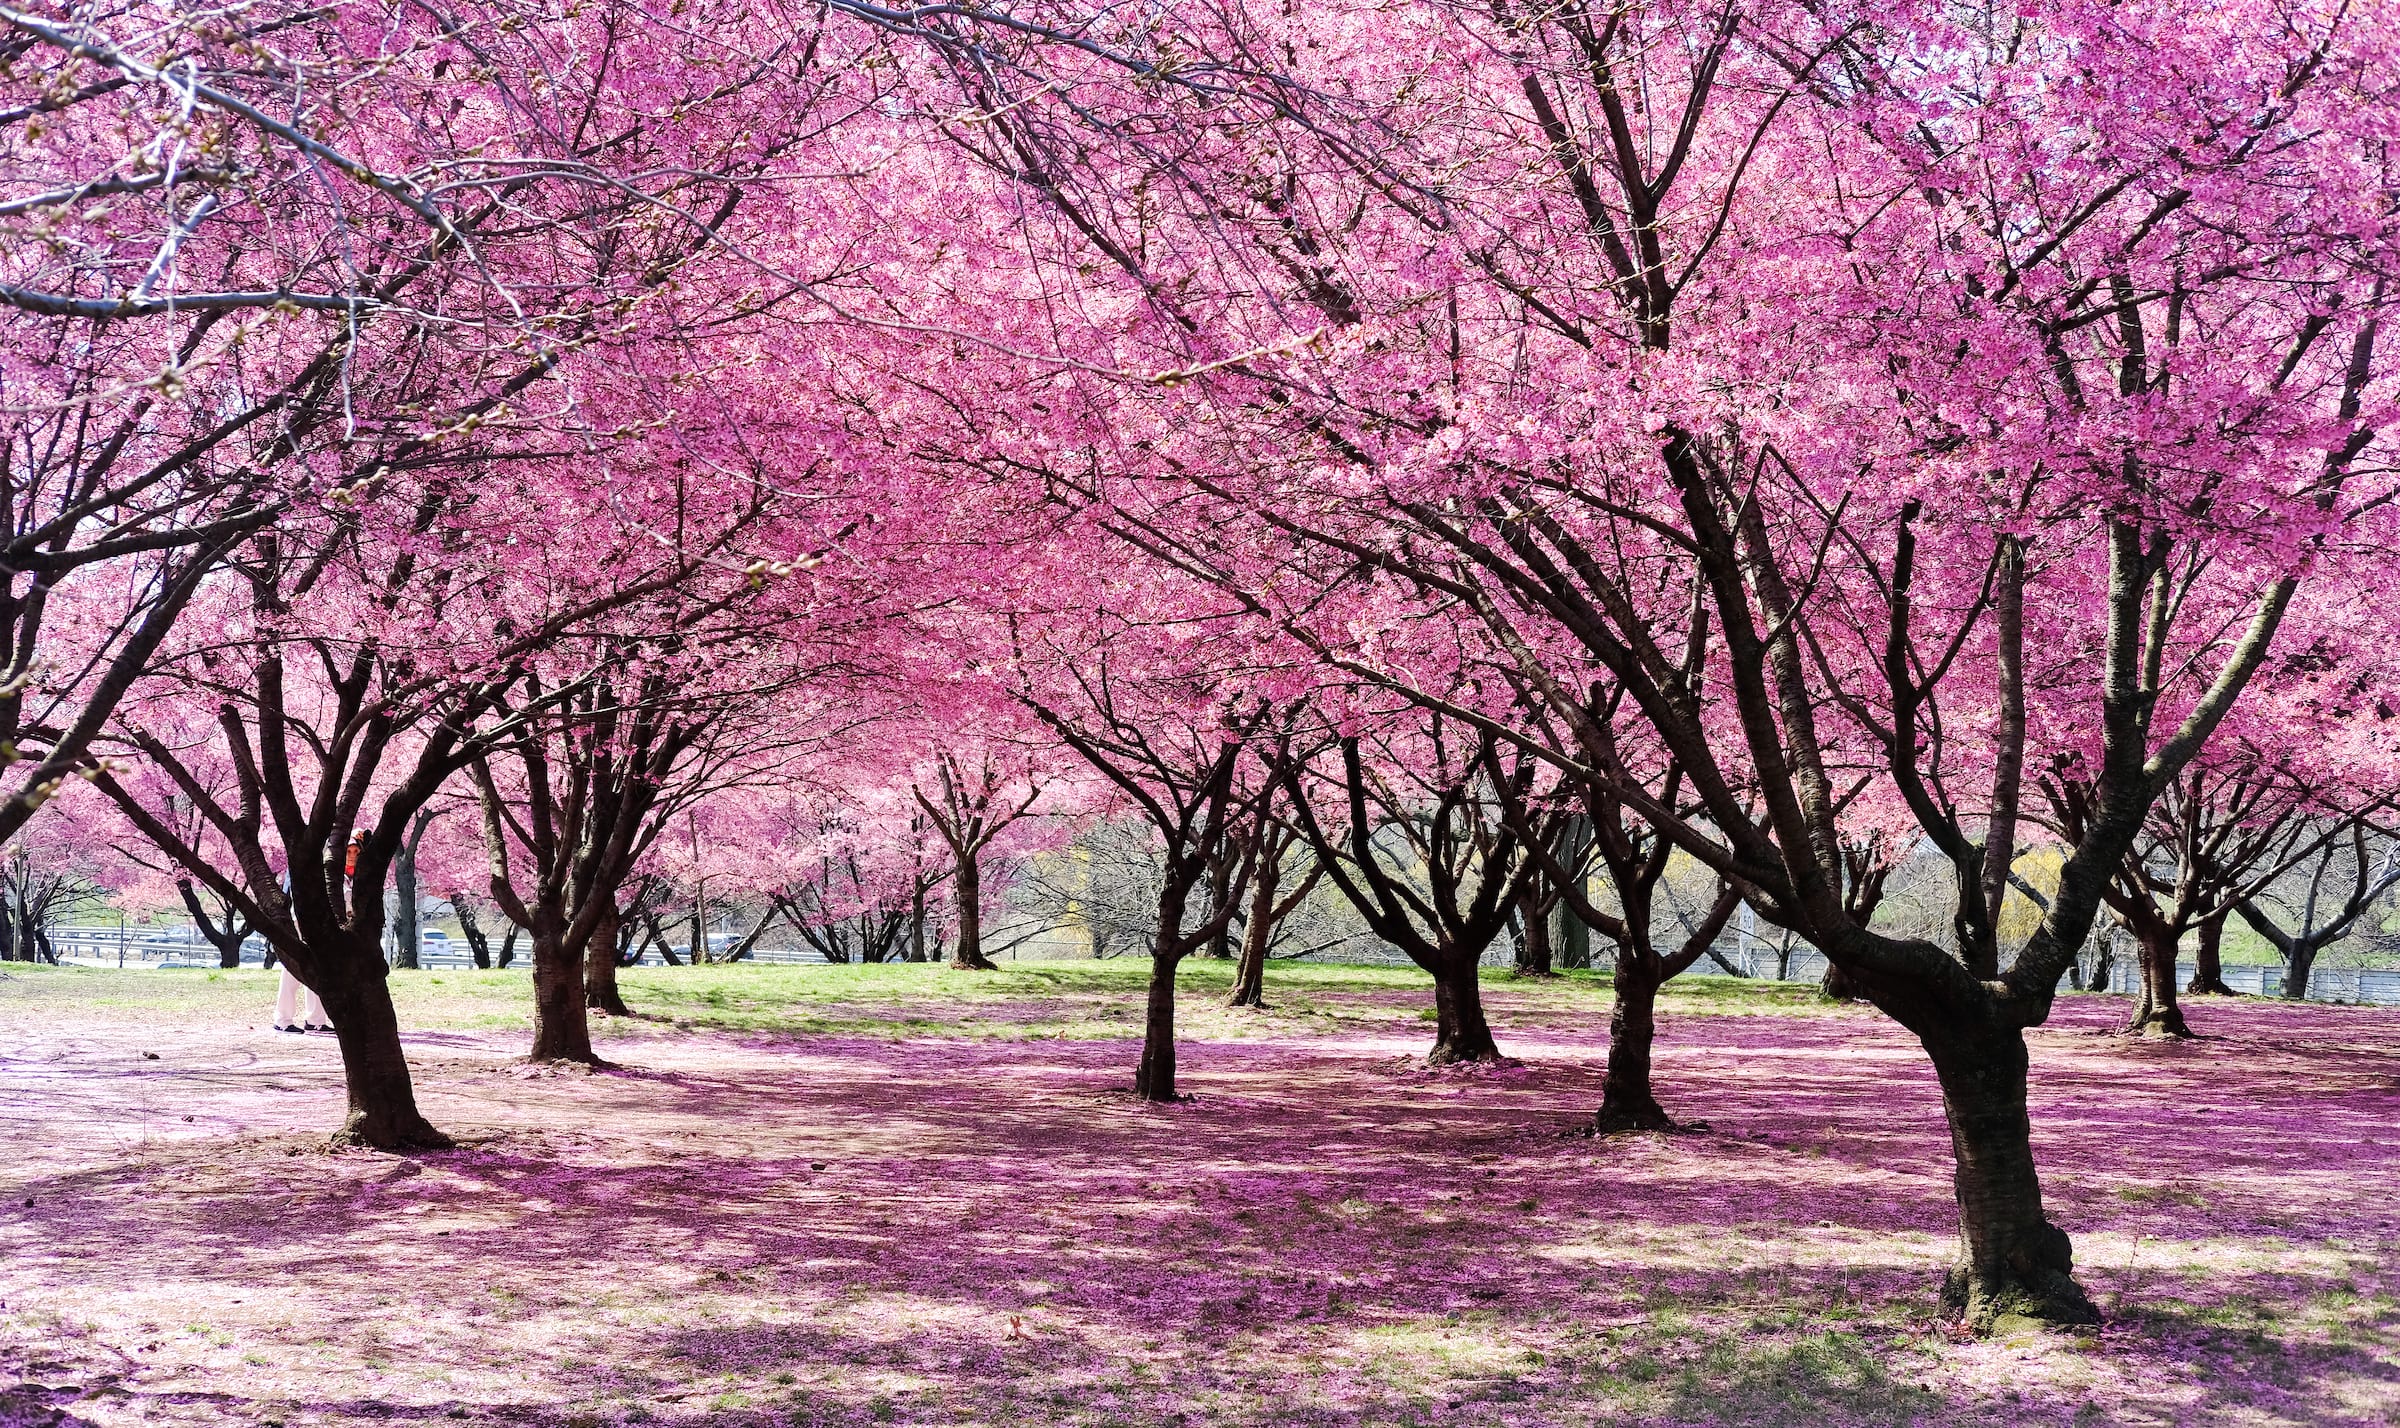 Beautiful photo of cherry blossoms in Flushing Meadows Corona Park Queens, NY